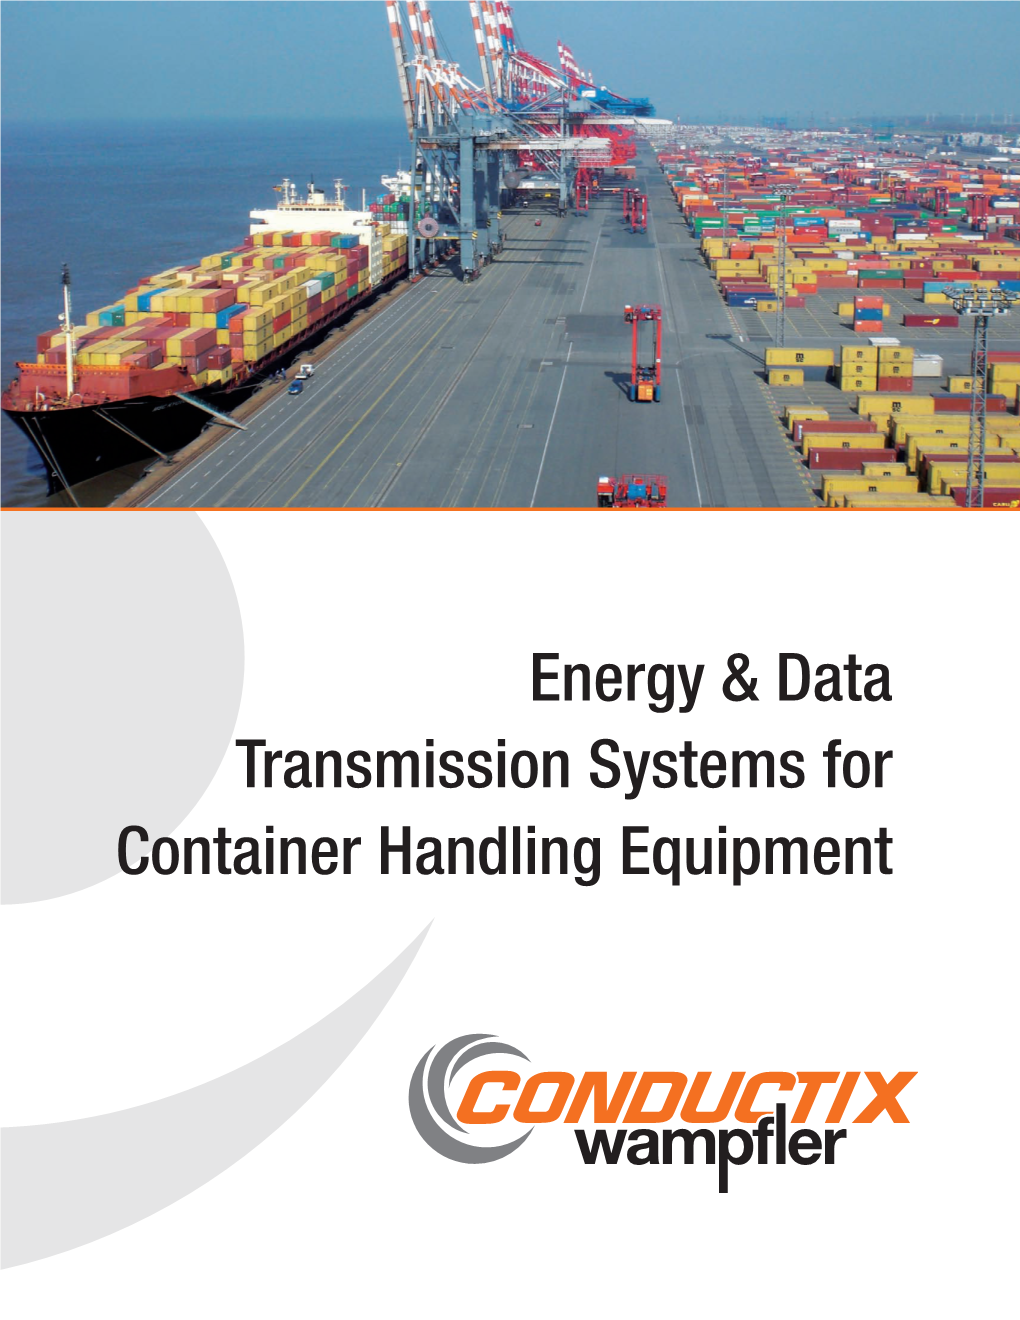 Container Handling Equipment Conductix-Wampfler – Solutions for Ports